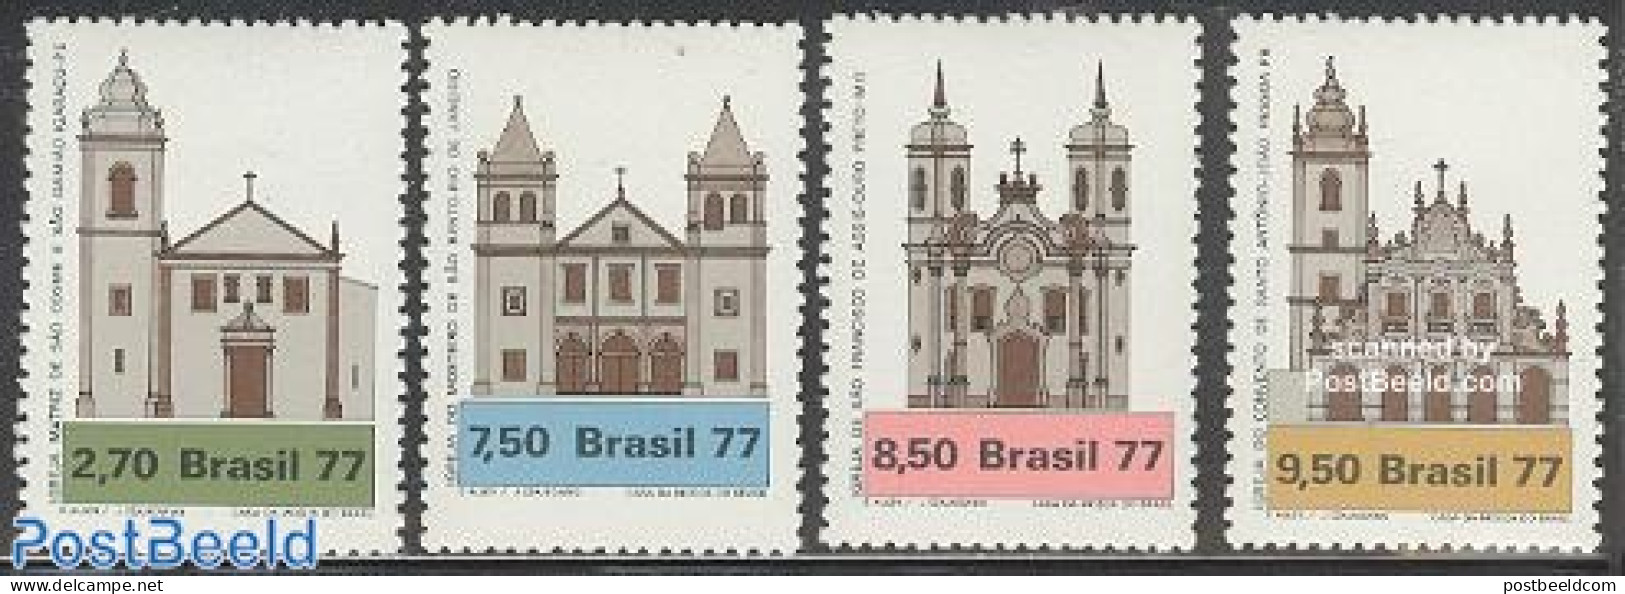 Brazil 1977 Churches 4v, Mint NH, Religion - Churches, Temples, Mosques, Synagogues - Ungebraucht